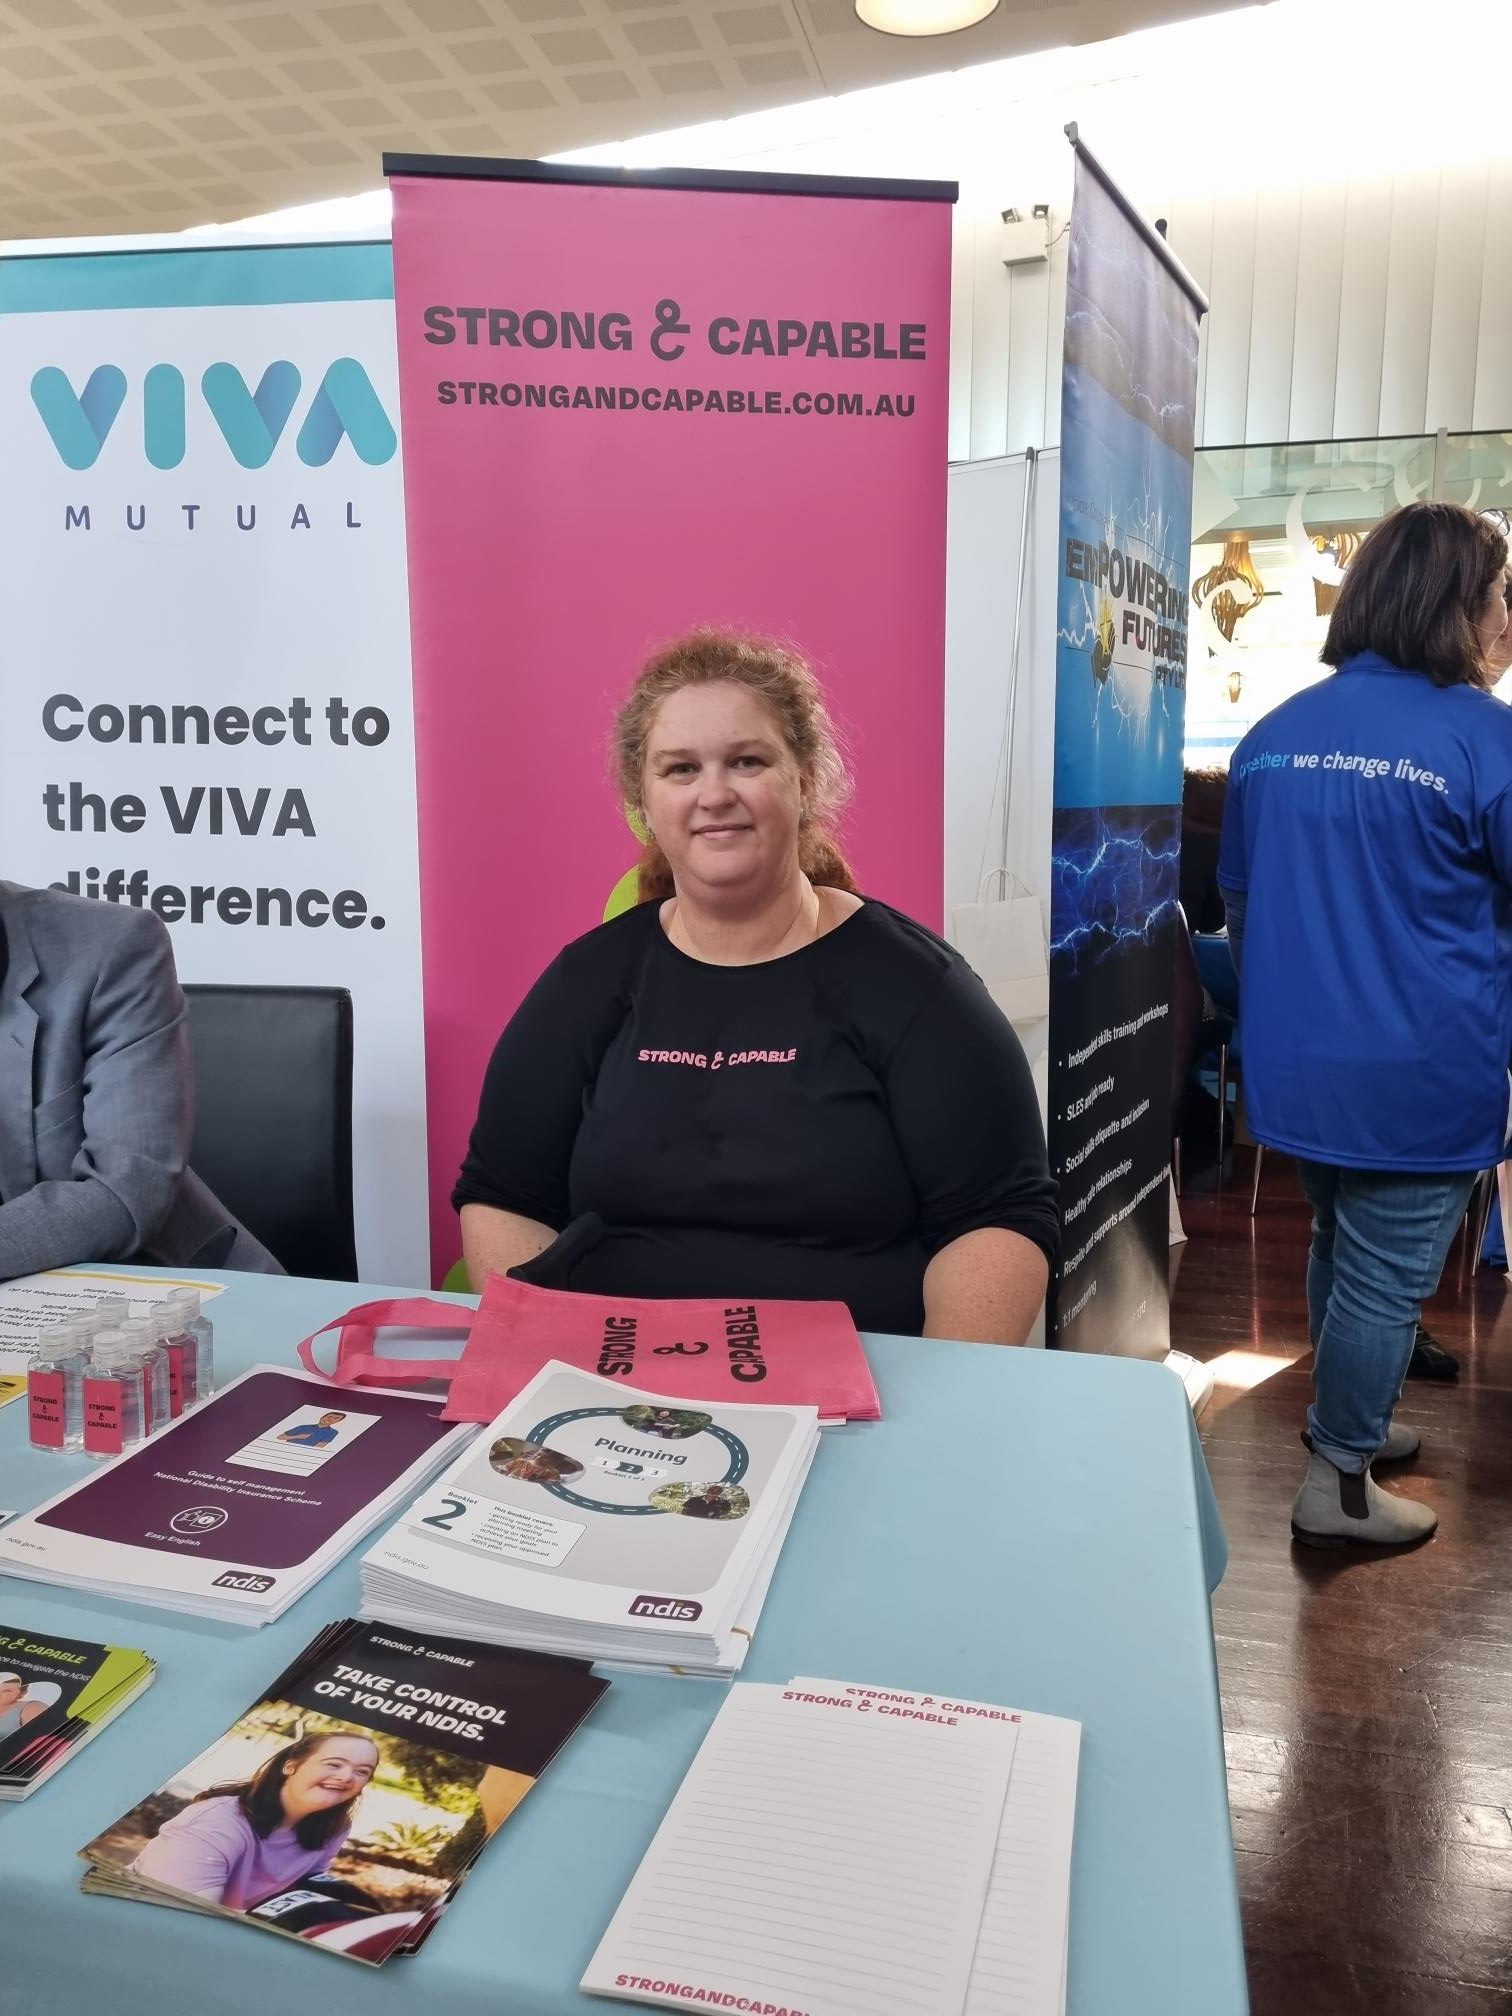 Strong & Capable team member sitting at a table at an Expo